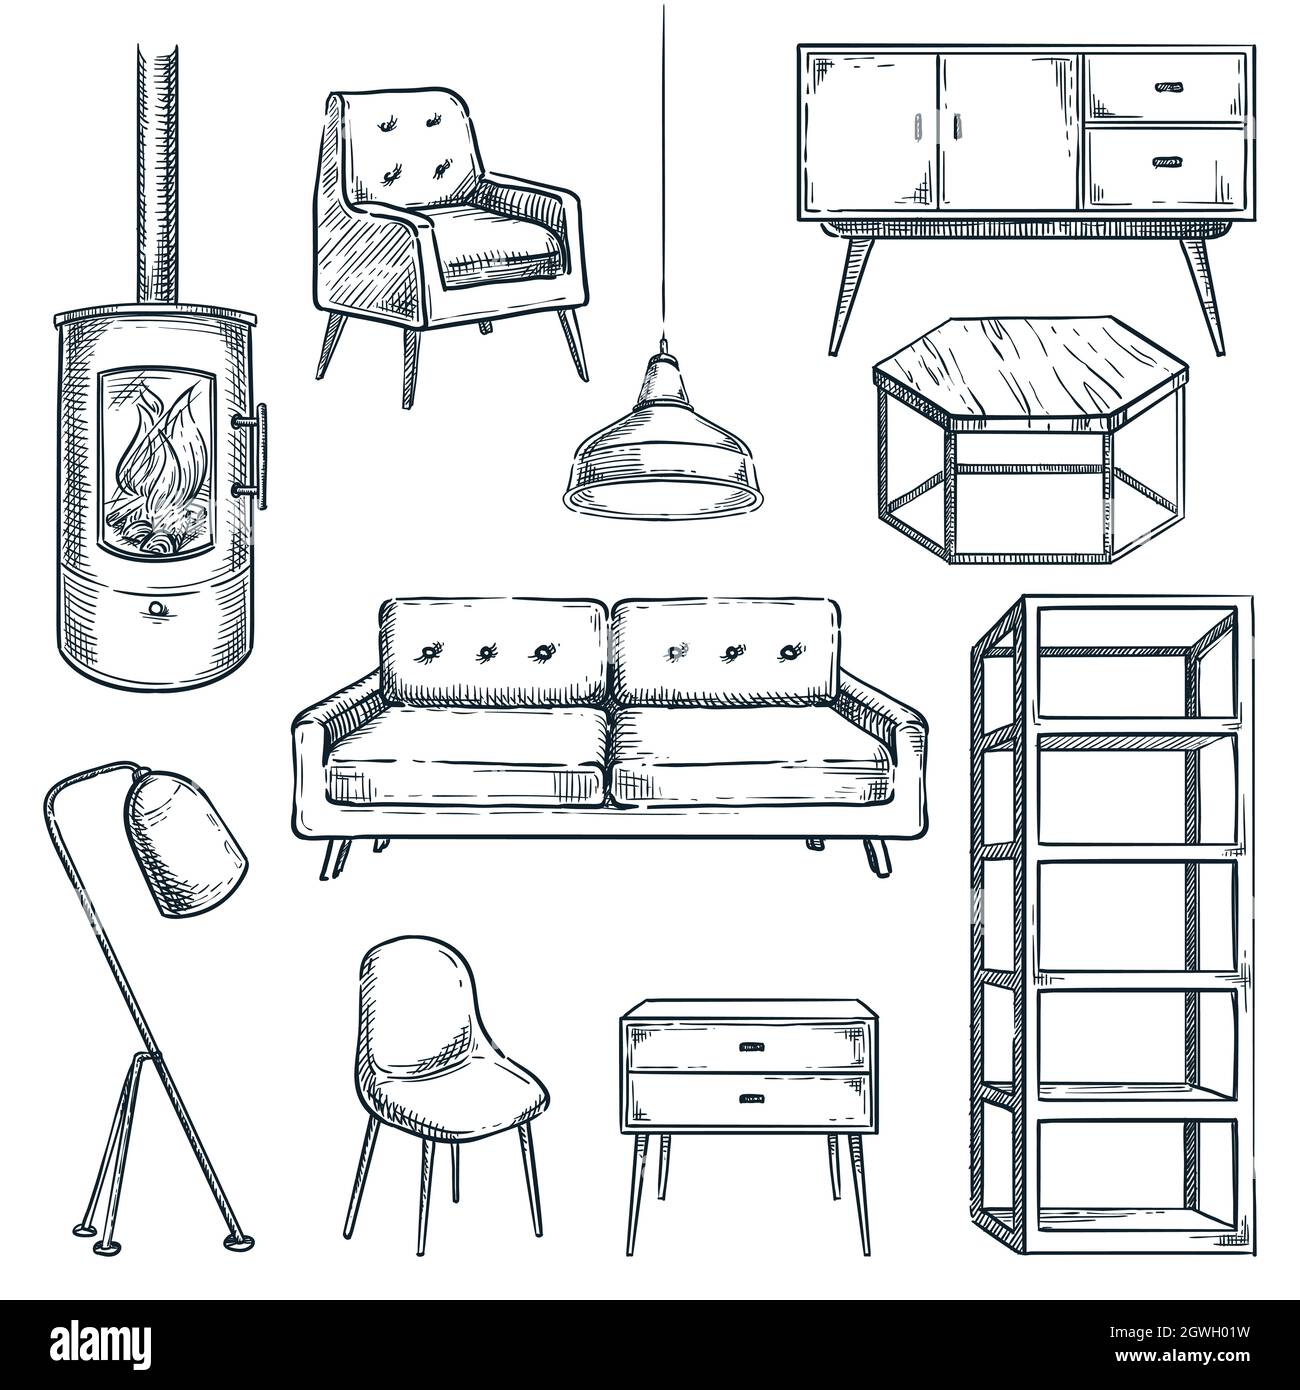 Sketches Furniture Modern Interior Objects Chairs Beds Technical Drawings  For Architectural Design Projects Recent Vector Illustrations Set  Collection Stock Illustration  Download Image Now  iStock